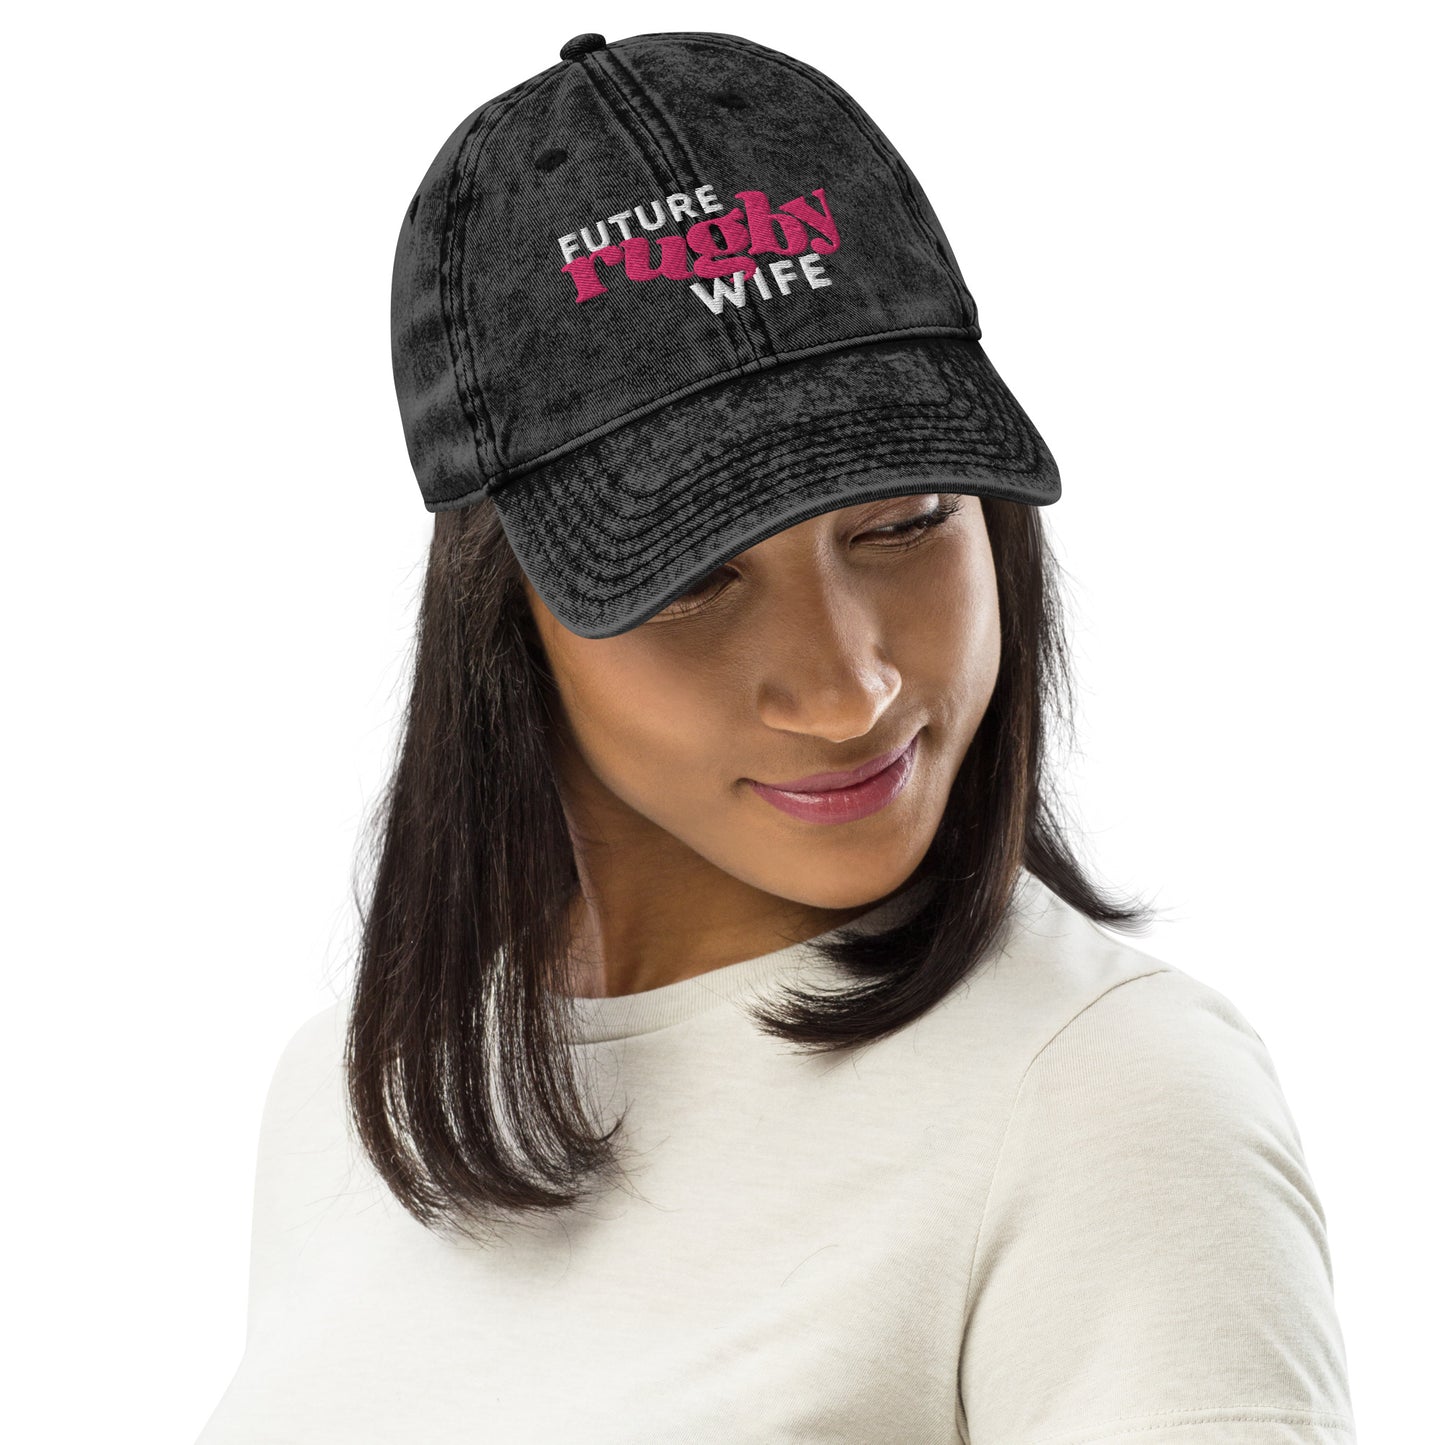 Future Rugby Wife Vintage Cotton Twill Cap